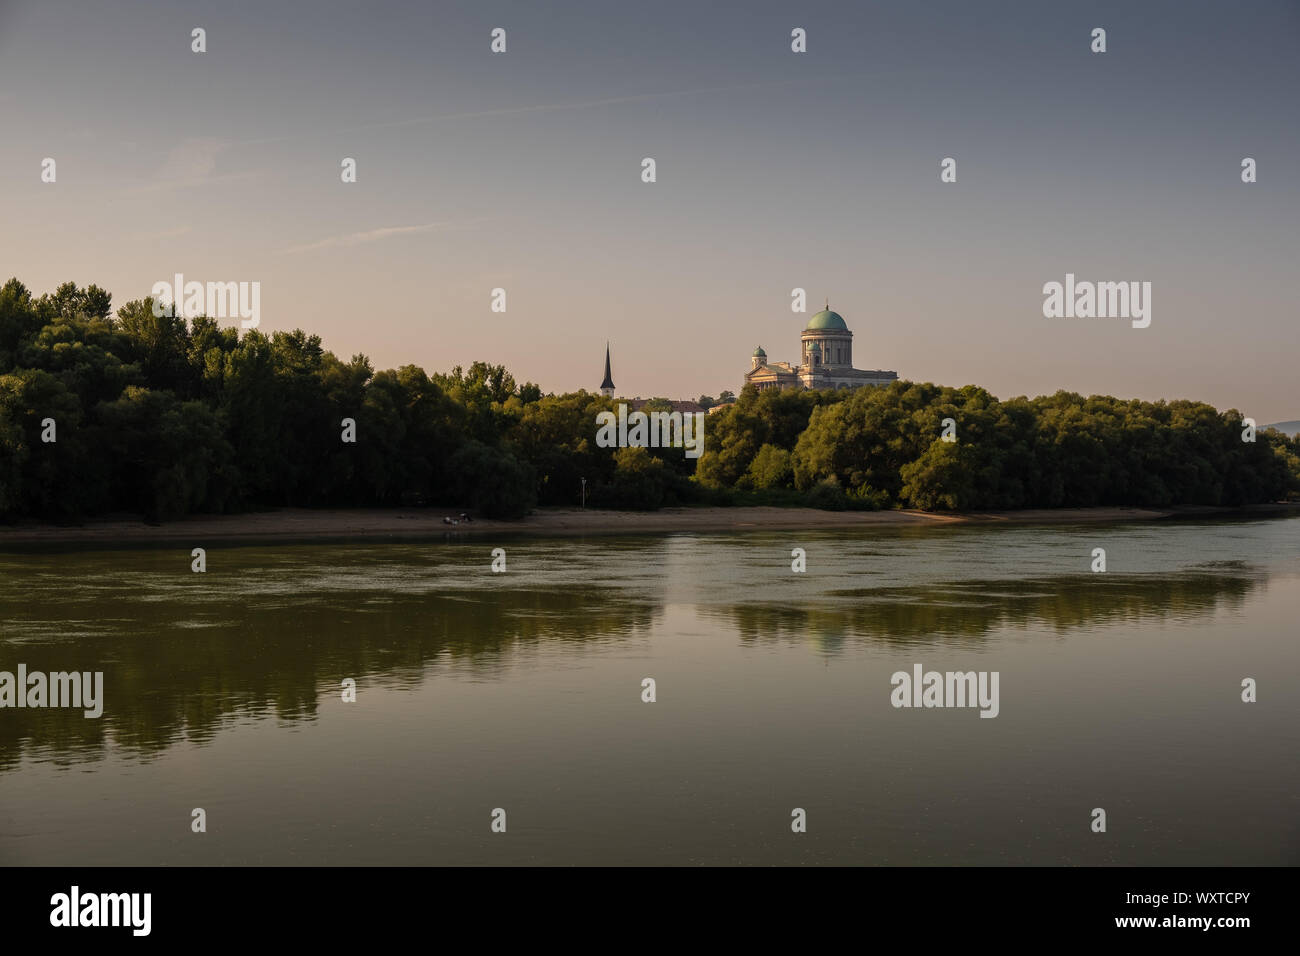 ESZTERGOM, HUNGARY - AUGUST 20, 2019: Esztergom Cathedral view from the Danube river at sunrise Stock Photo